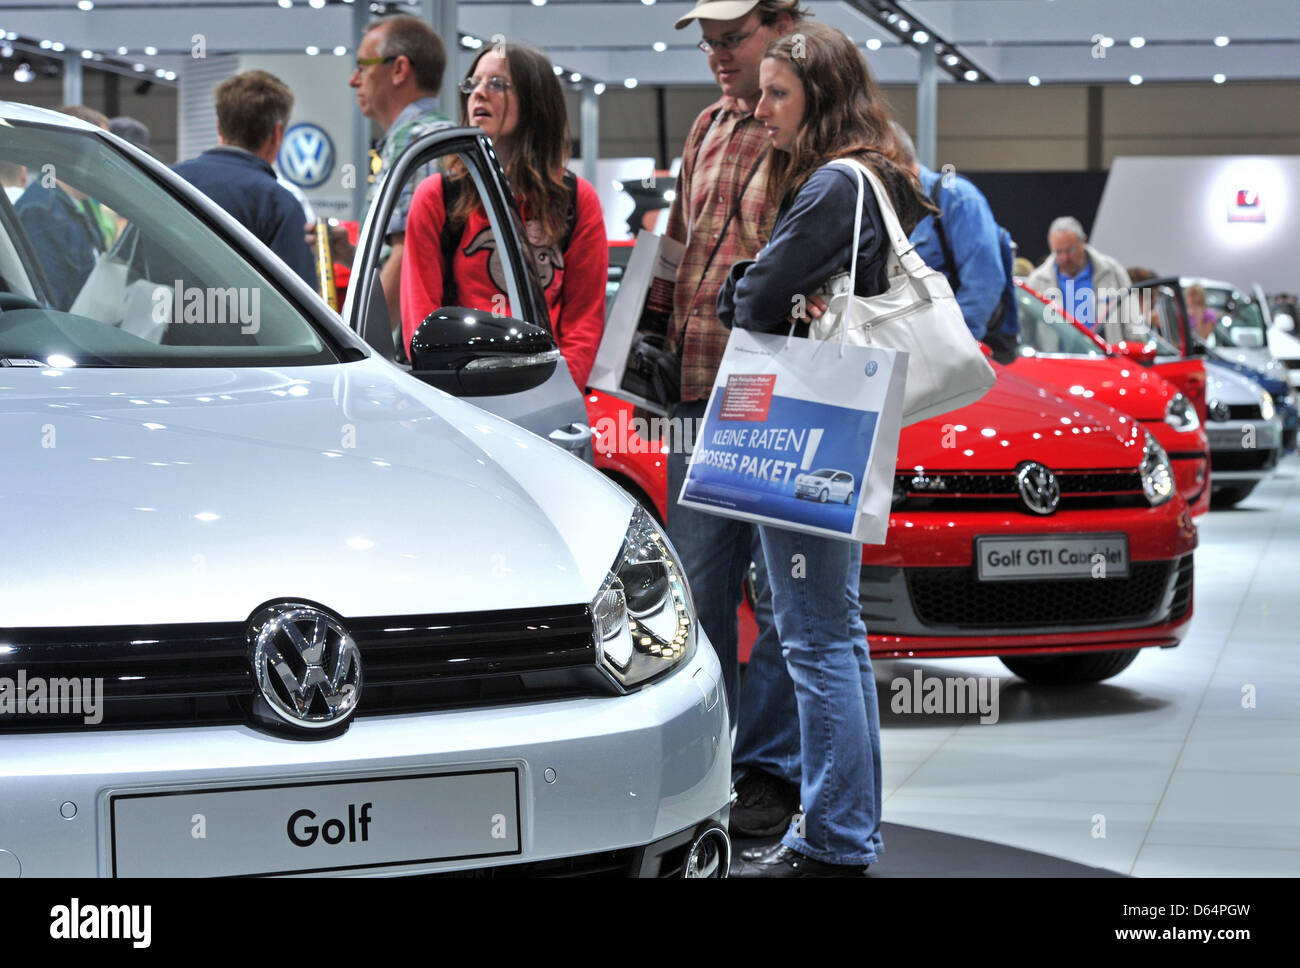 Visitors stroll around exhibited cars and motor vehicles of car manufacturer Volkswagen (VW) at the automobile fair AMI in Leipzig, Germany, 2 June 2012. German and international car manufacturers present their latest car novelties at the Leipzig trade fair centre from 2 June to 10 June 2012. Around 280,000 visitors are expected to attend the fair which features up to 450 exhibitor Stock Photo